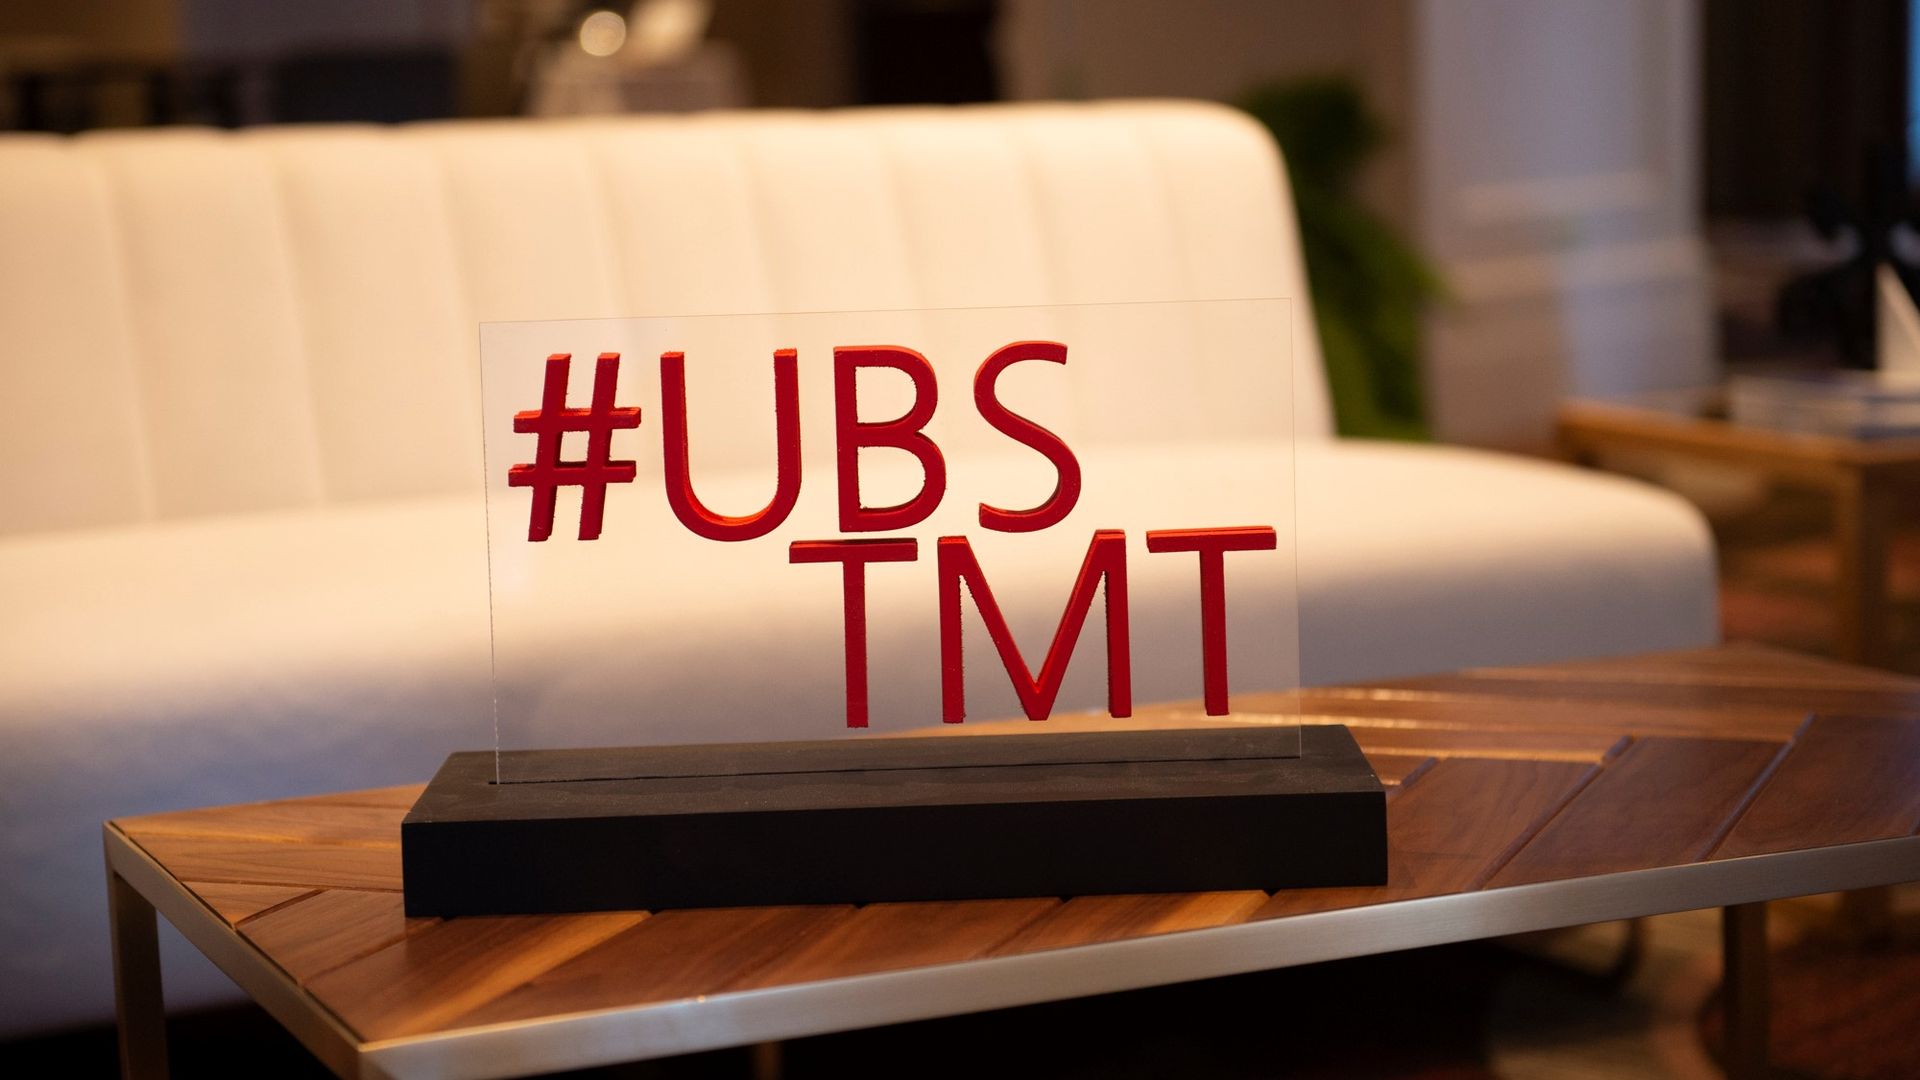 Hashtag sign with #UBSTMT